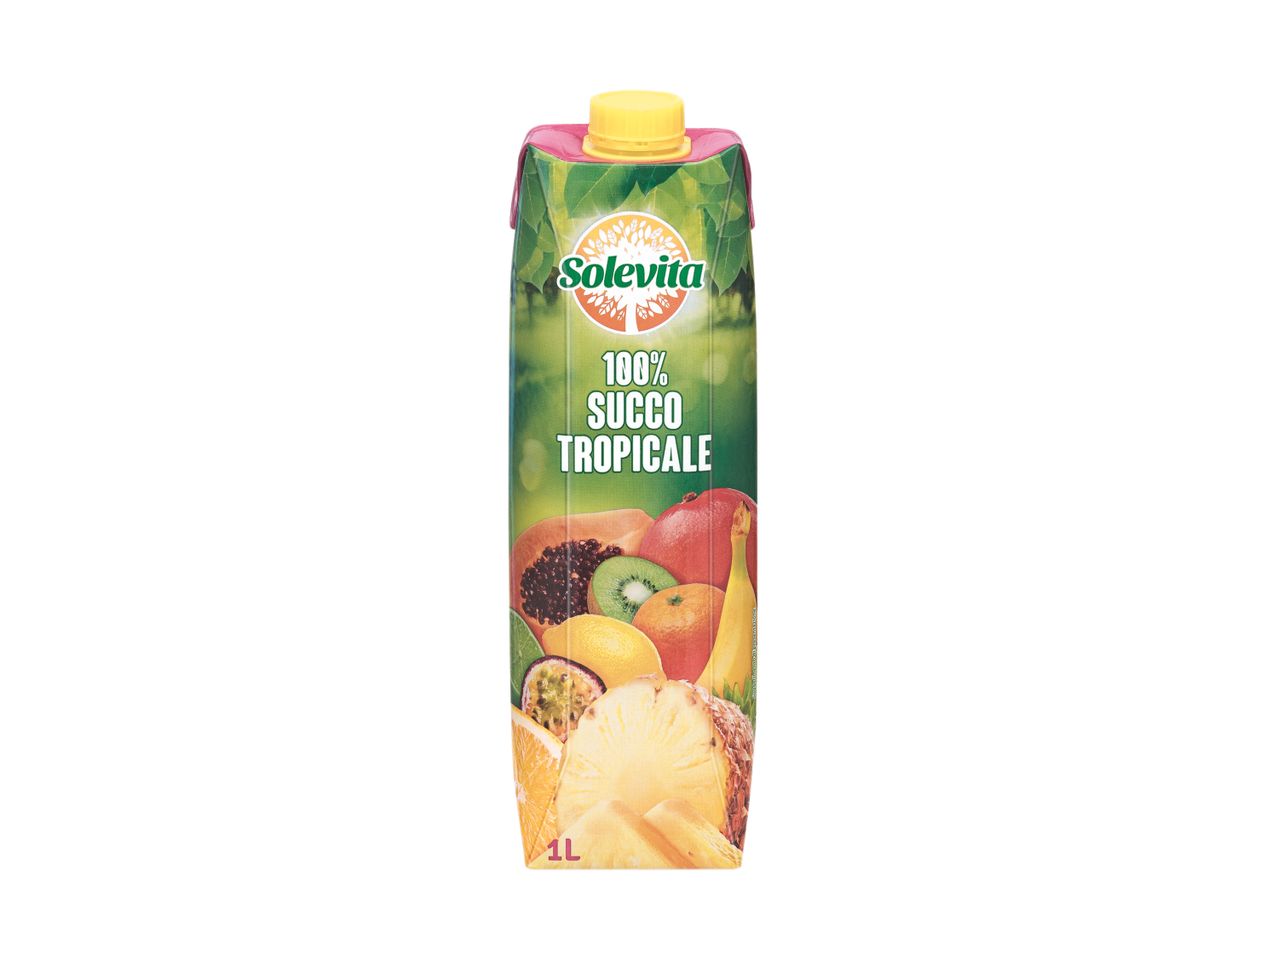 Go to full screen view: Tropical Juice - Image 1